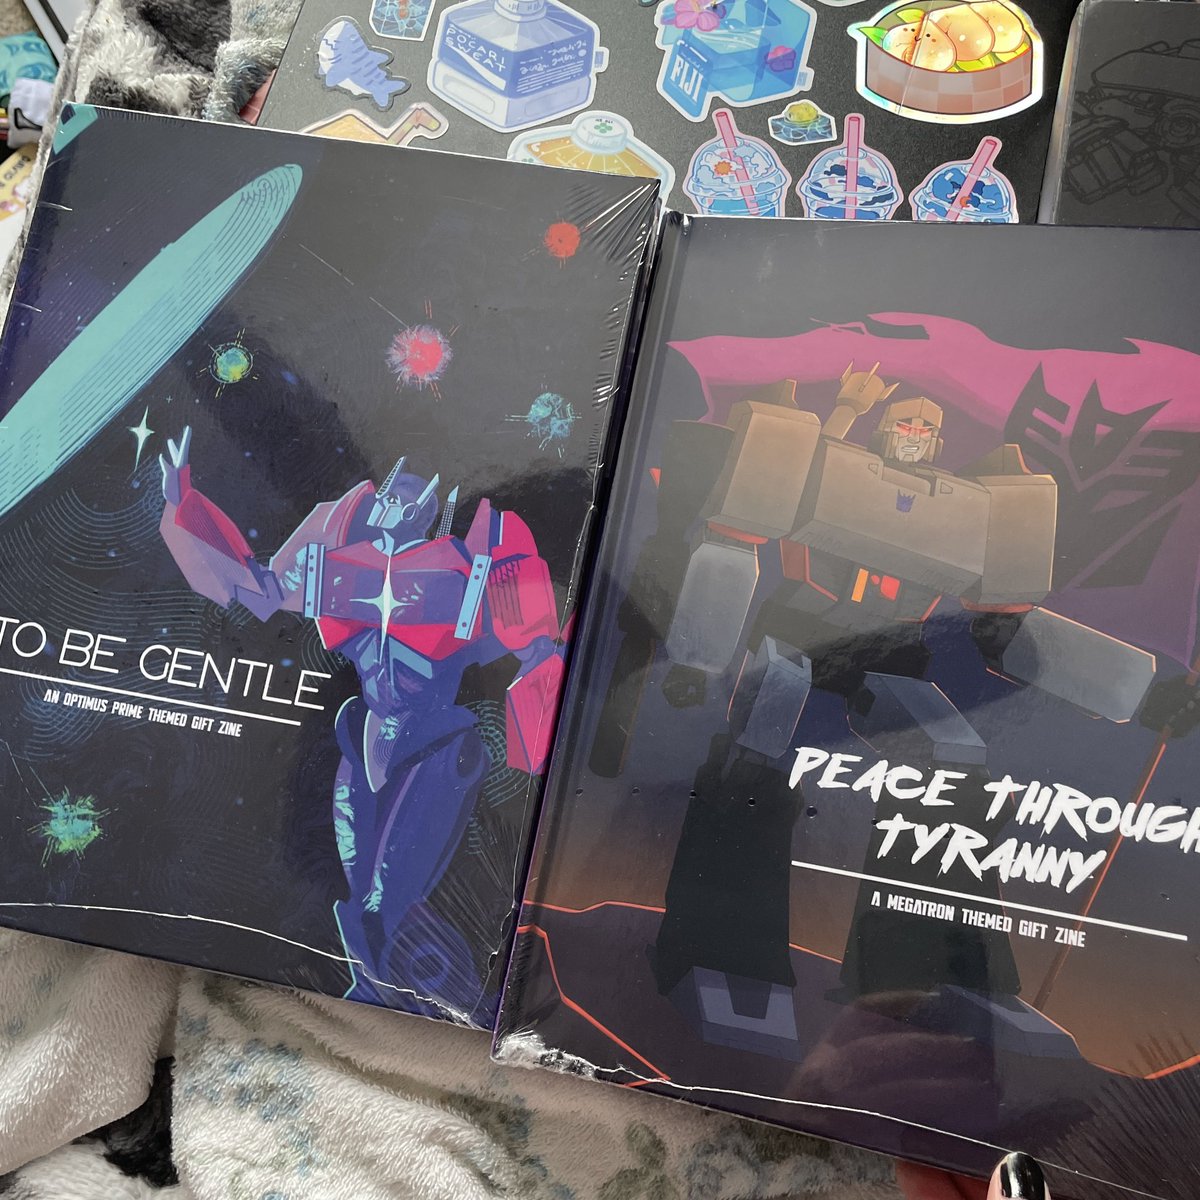 Our physicals have arrived! They’ll be given to Peter and Frank at TFcon LA, hope to see you there!